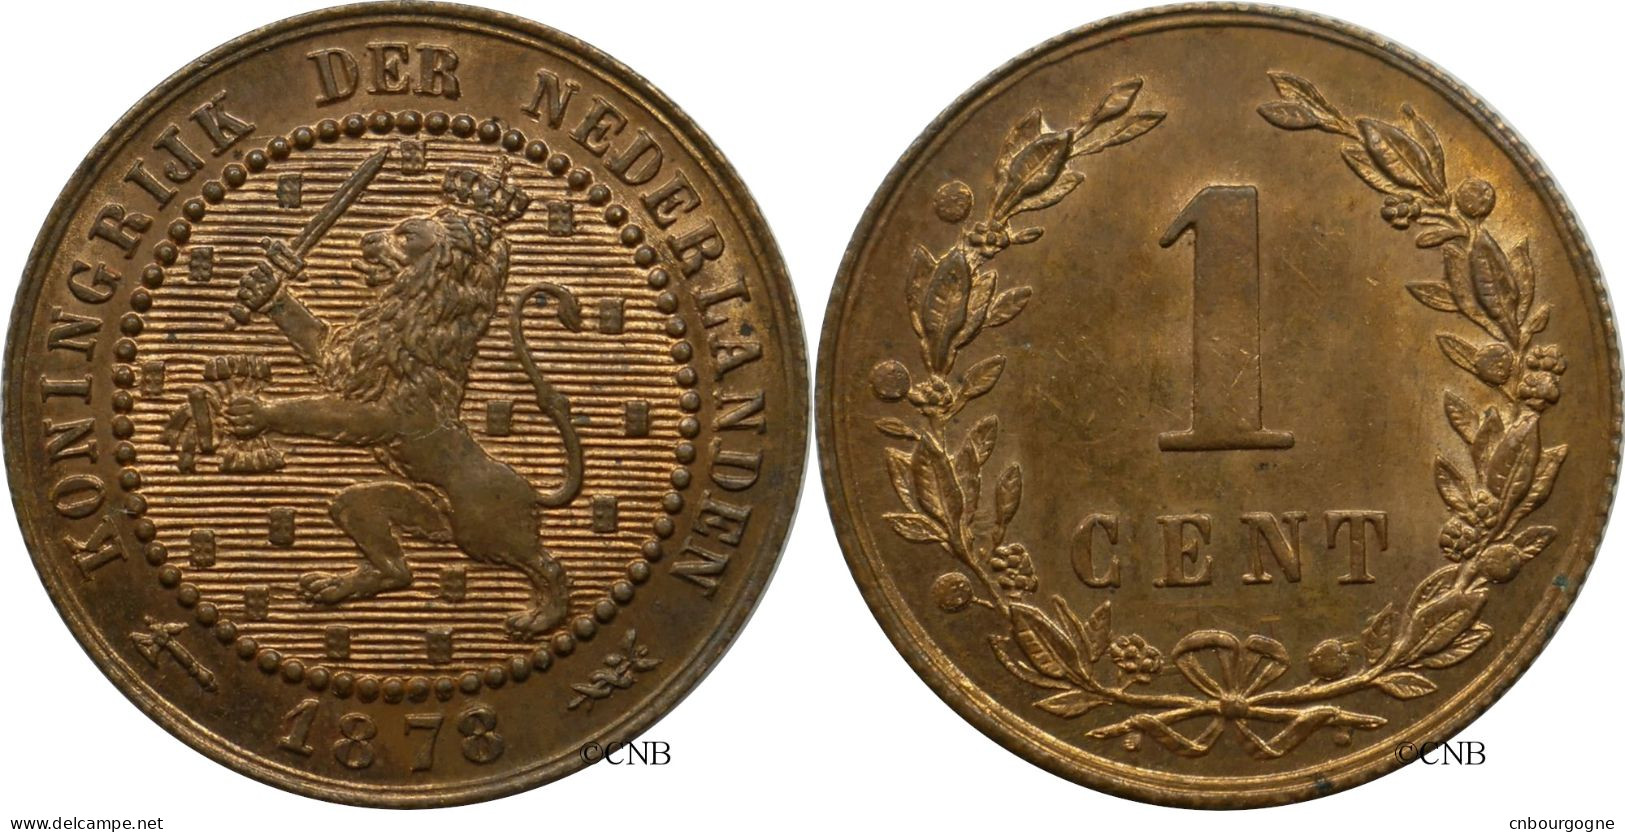 Pays-Bas - Royaume - Guillaume III - 1 Cent 1878 - SUP+/MS62 - Mon5831 - 1849-1890: Willem III.